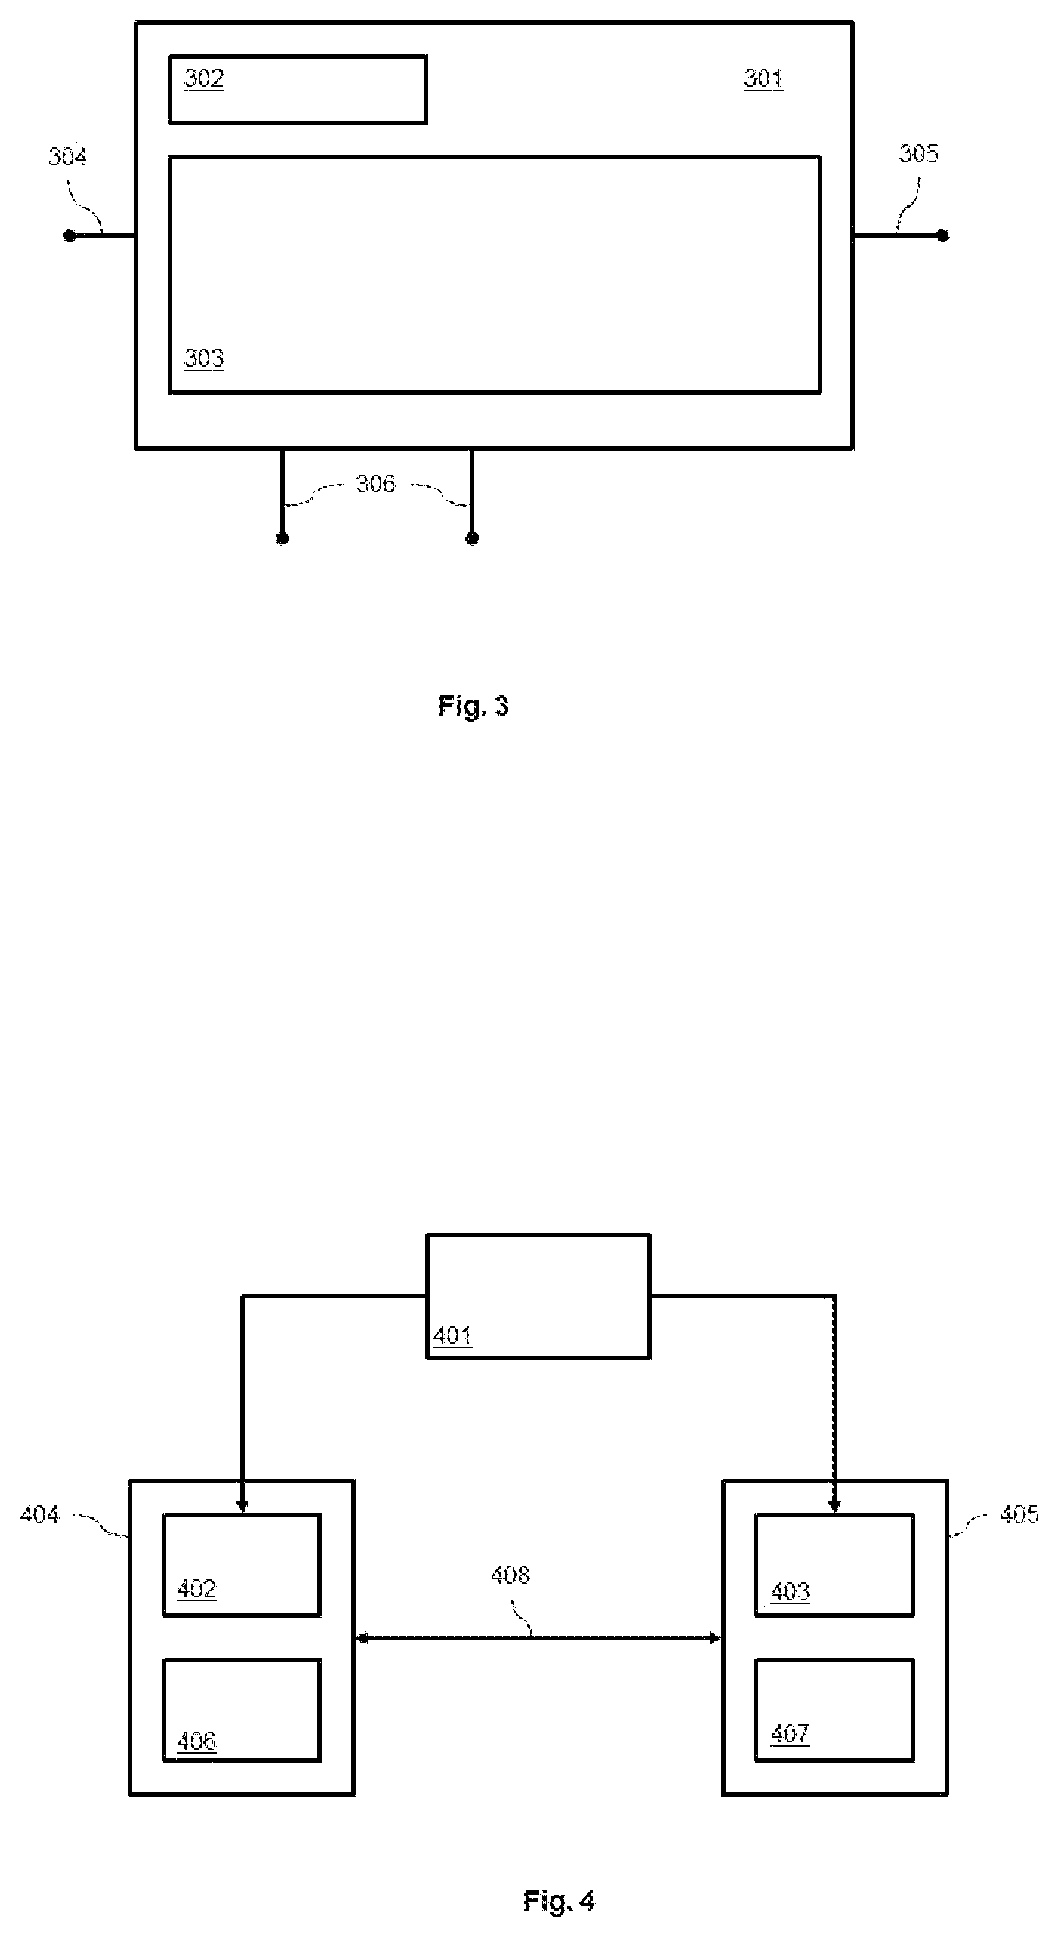 Service application system for payment terminals